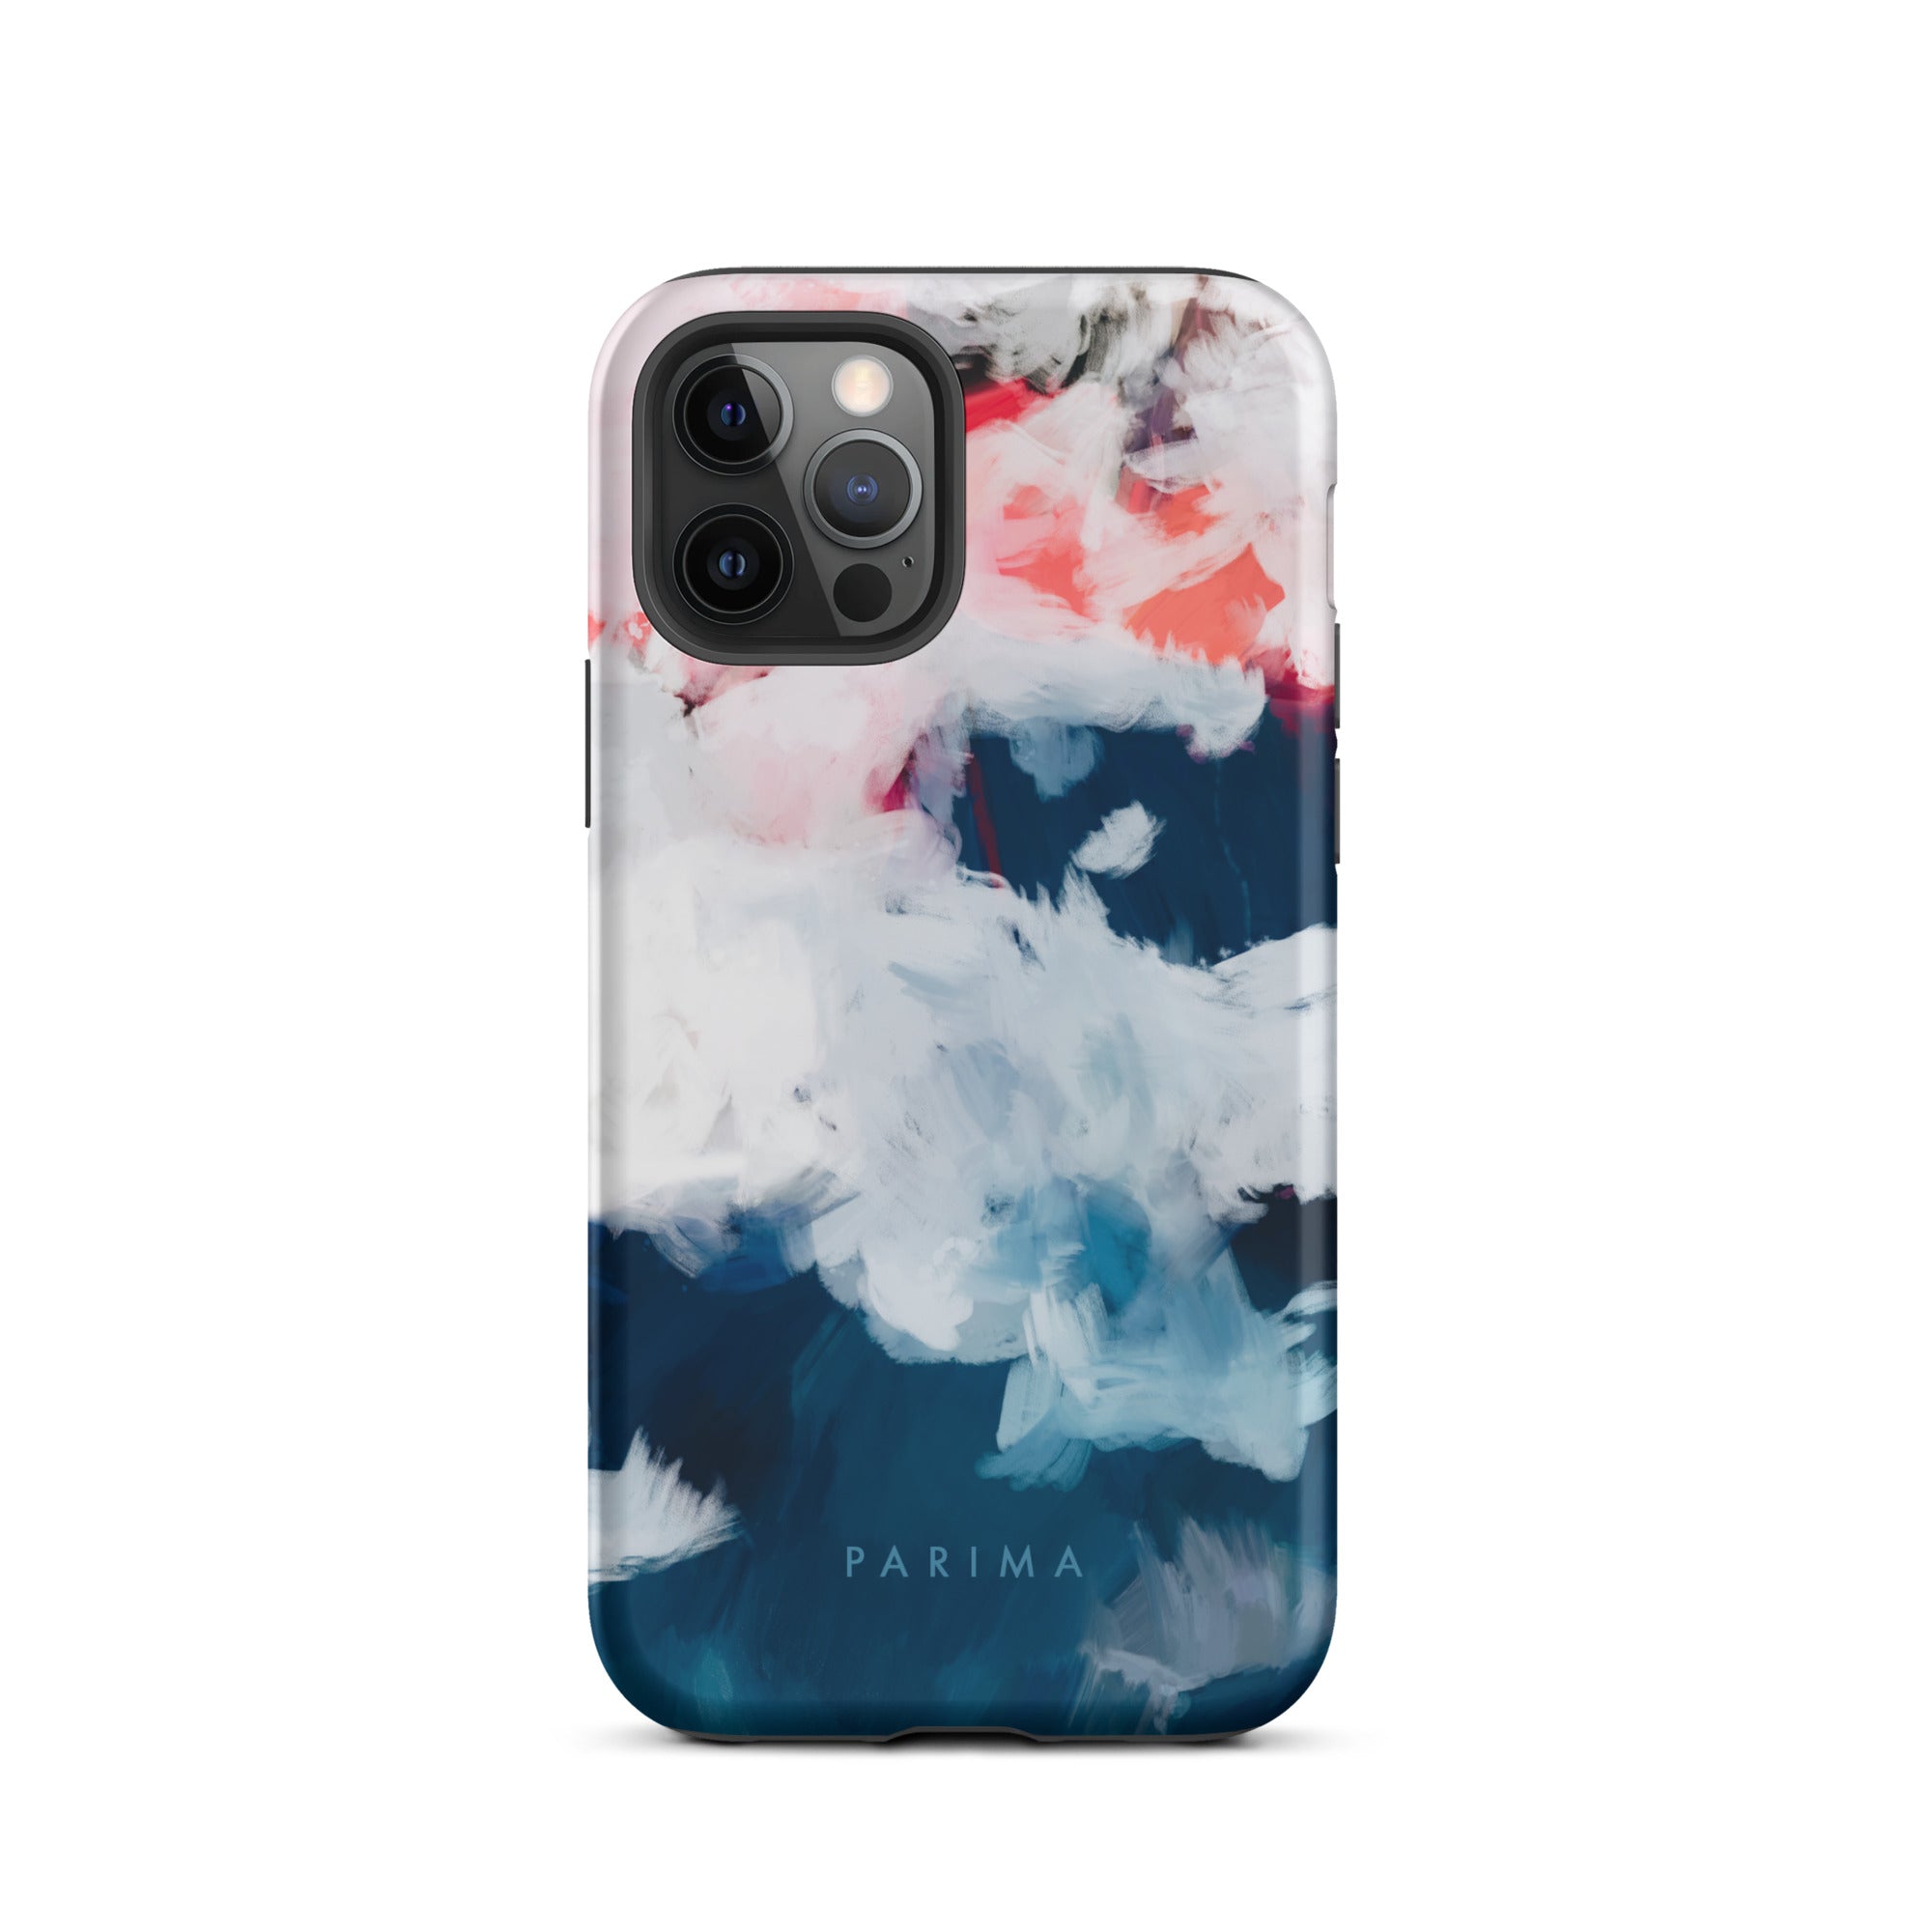 Oceane, blue and pink abstract art on iPhone 12 Pro tough case by Parima Studio